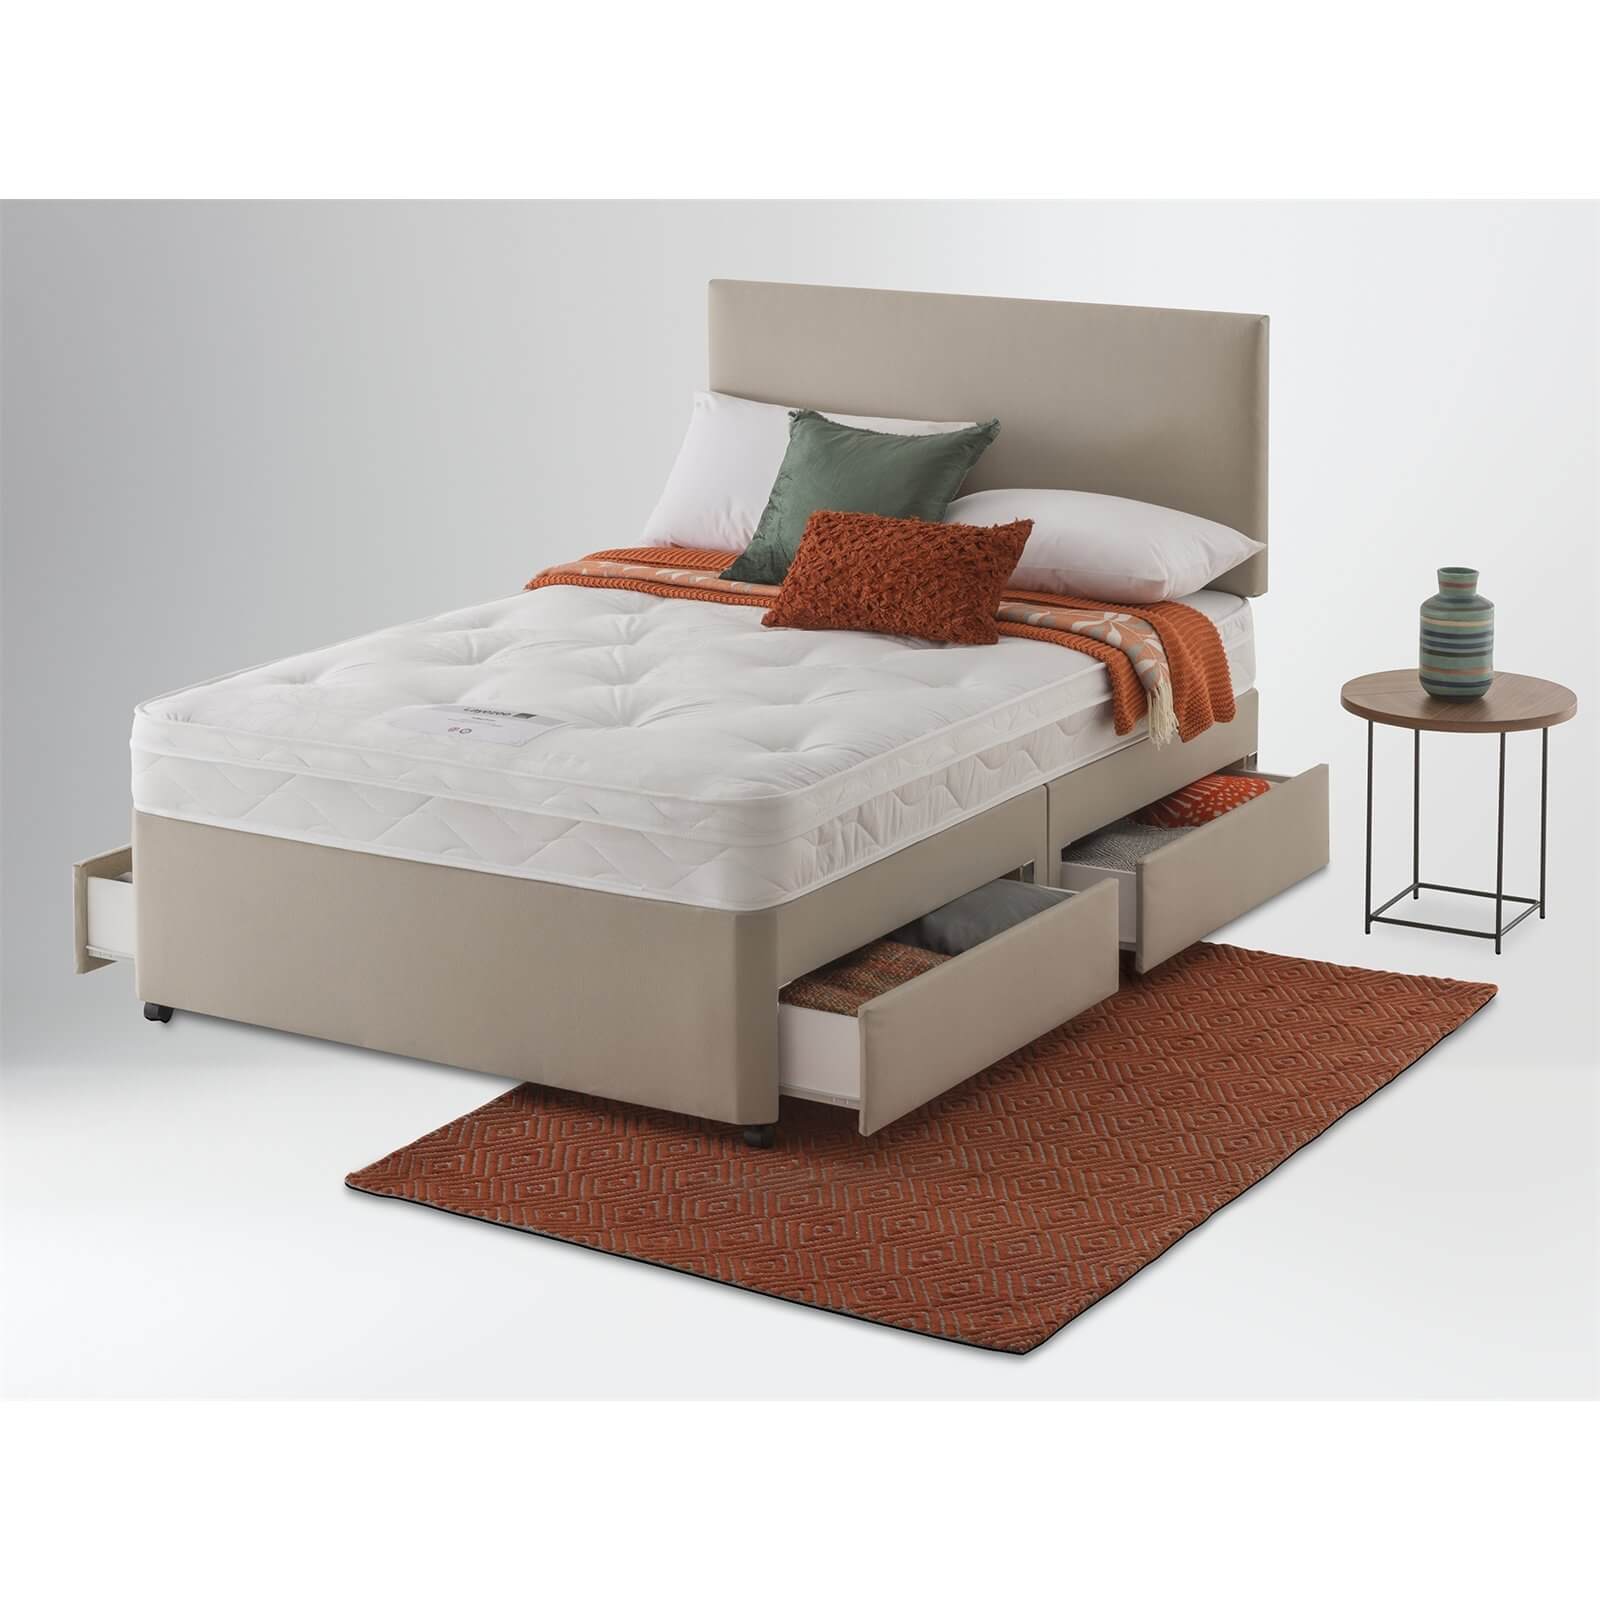 Layzee by Silentnight Ortho Divan Bed 4 Drawer - Sandstone - Double